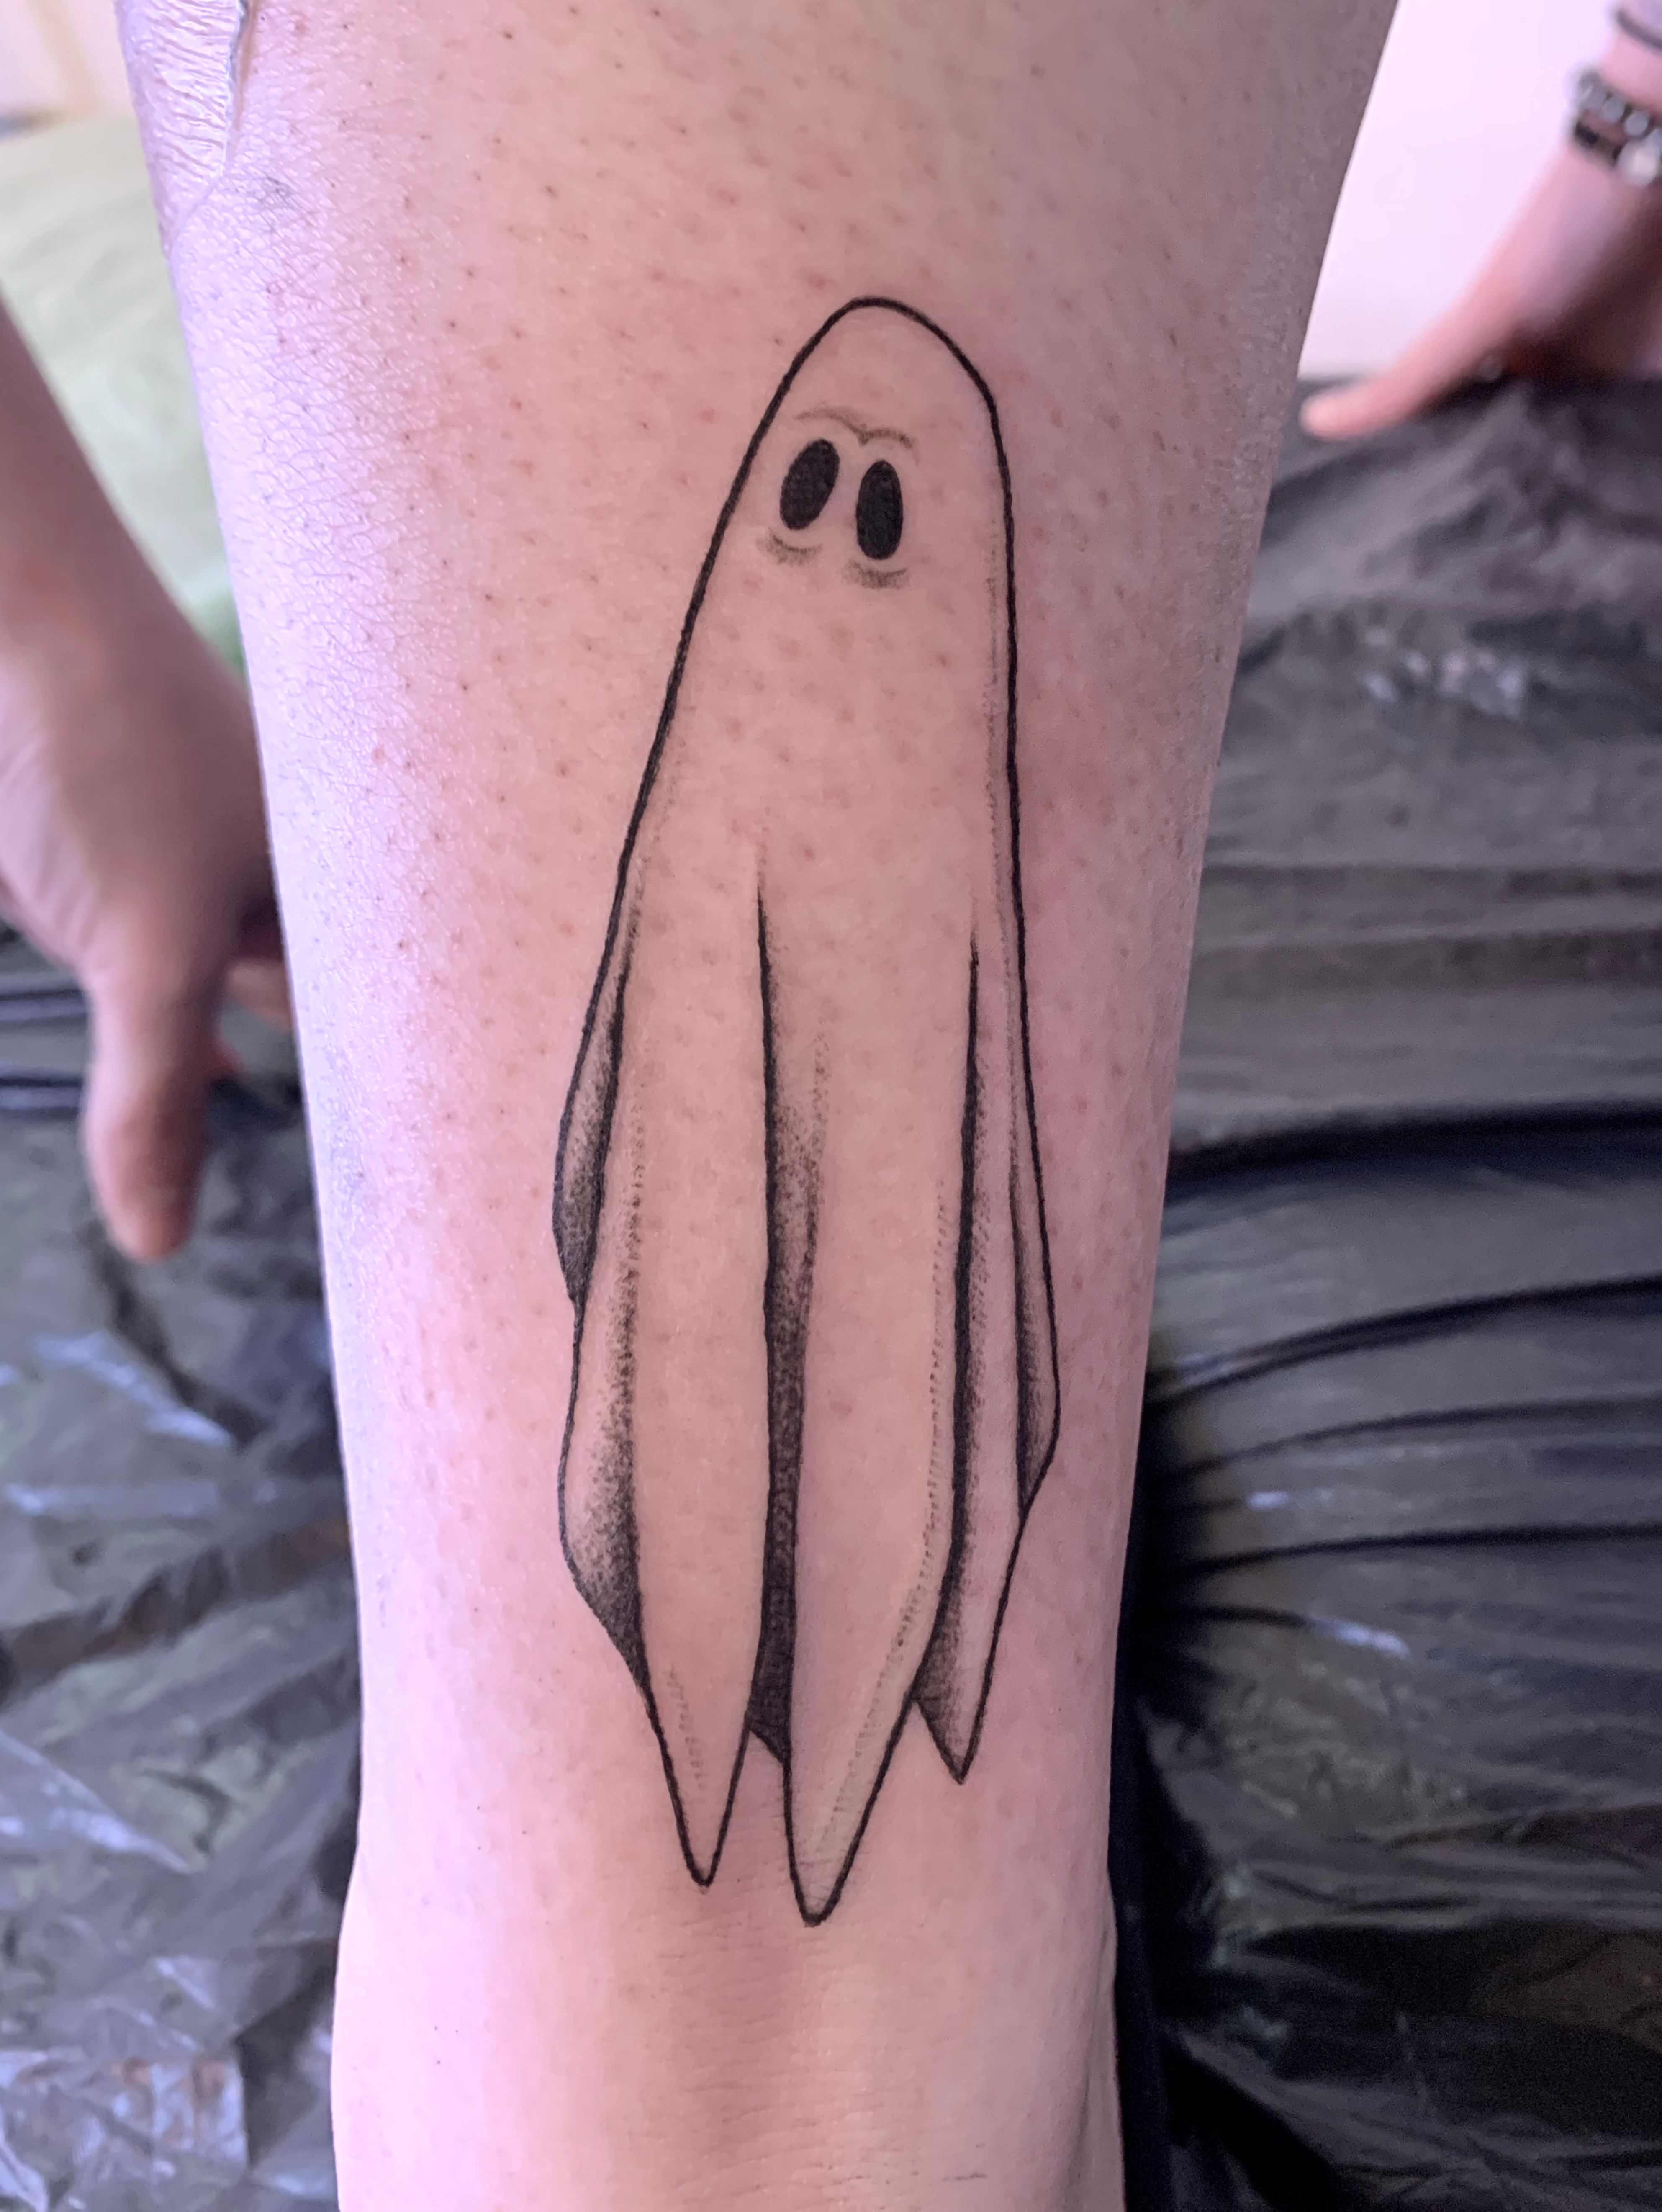 22 Ghost Tattoos That Are Seriously Cute and Not at All Spooky